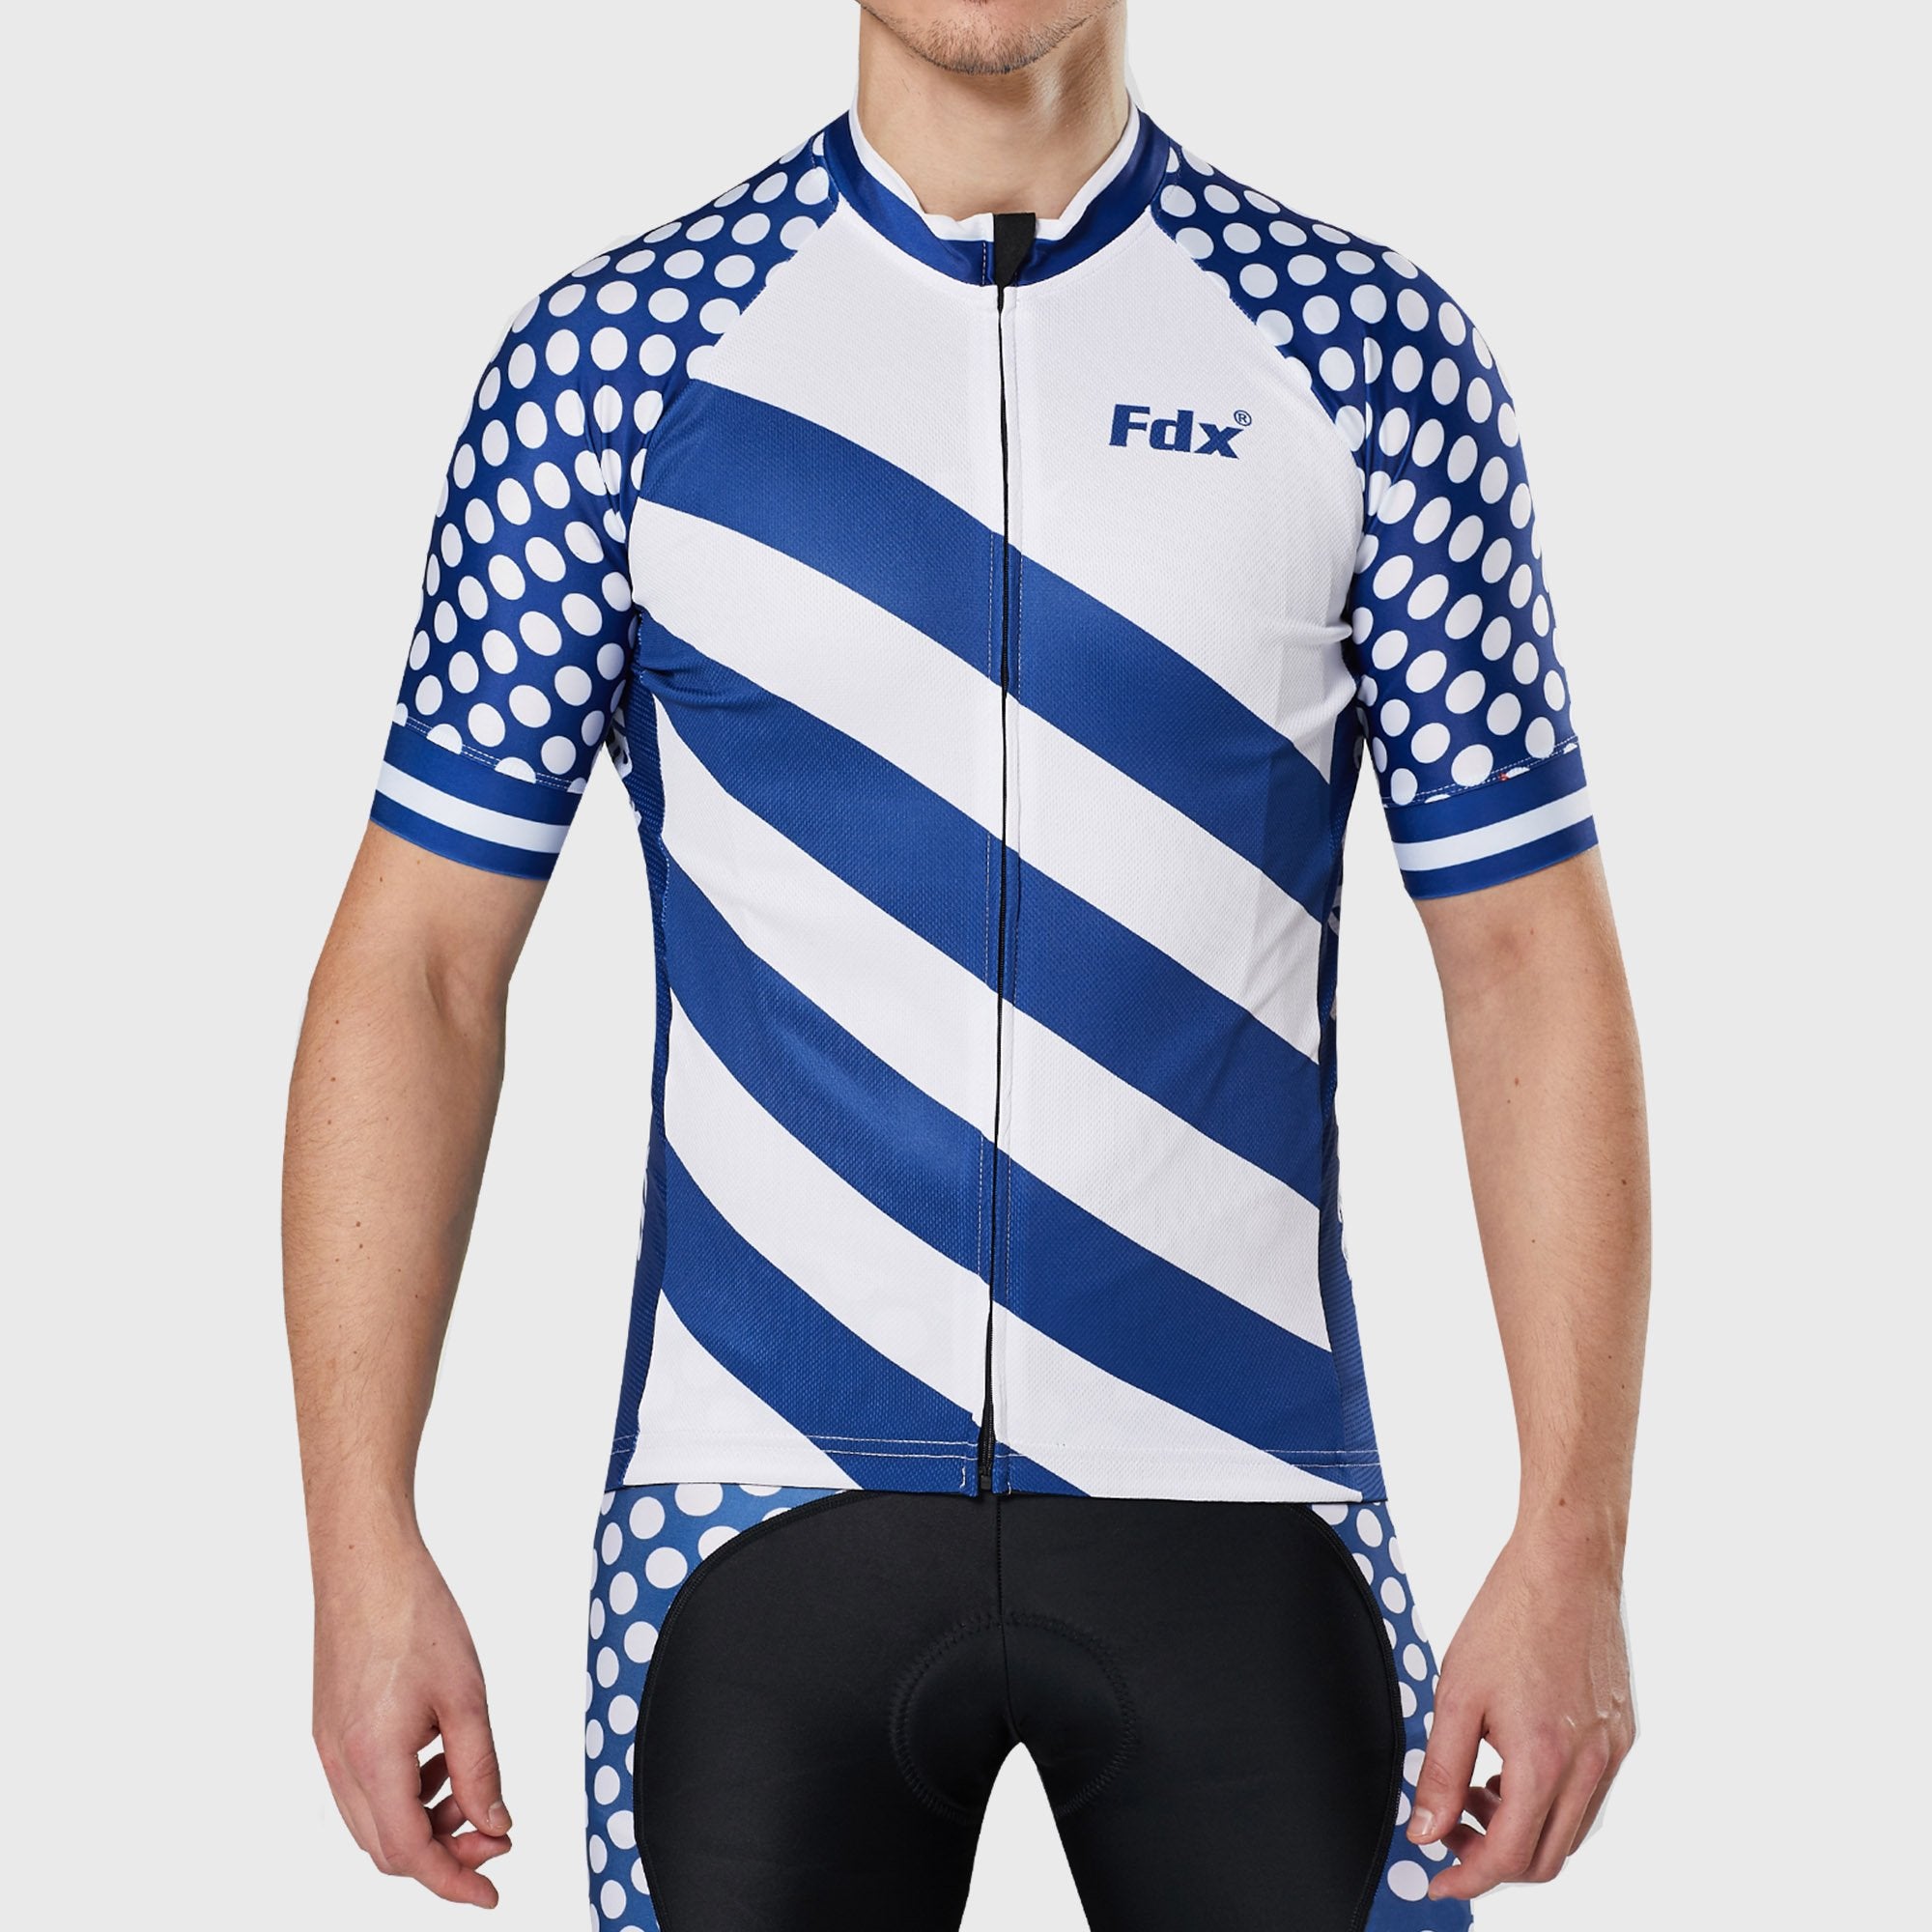 Fdx Men’s blue & white full zip best short sleeves cycling jersey indoor & outdoor Hi-Viz Reflective details breathable summer lightweight biking top, skin friendly Hi-Viz Reflective half sleeves cycling shirt for riding with two back pockets